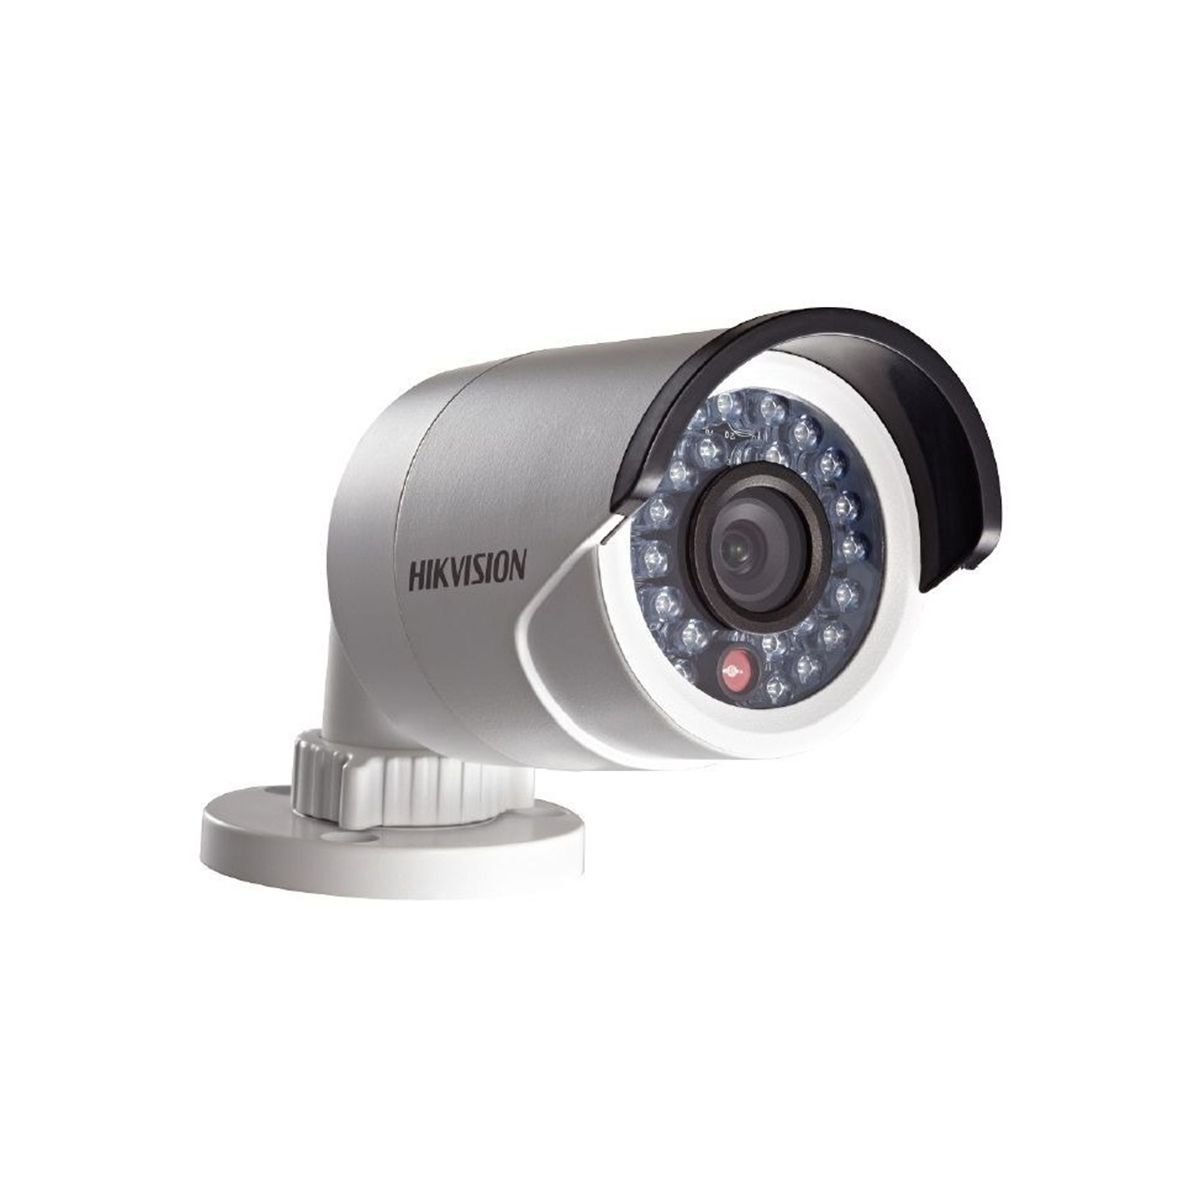 Cámara IP WiFi Hikvision Tipo Bullet DS-2CD2010F-IW DS-2CD2010F-IW